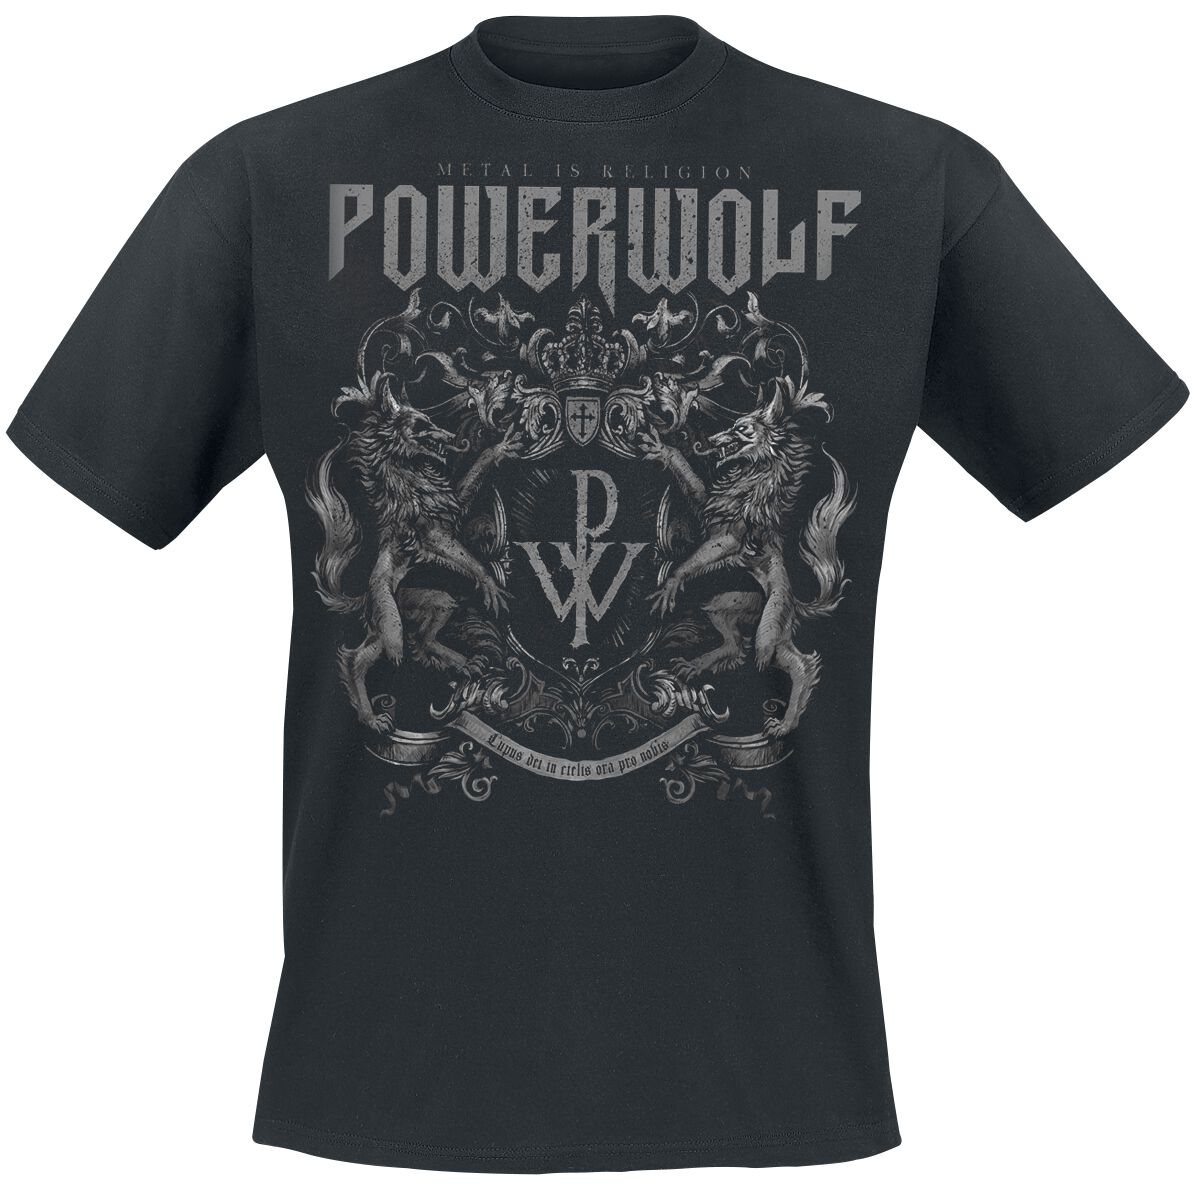 Image of T-Shirt di Powerwolf - Crest - Metal Is Religion - S a 3XL - Uomo - nero